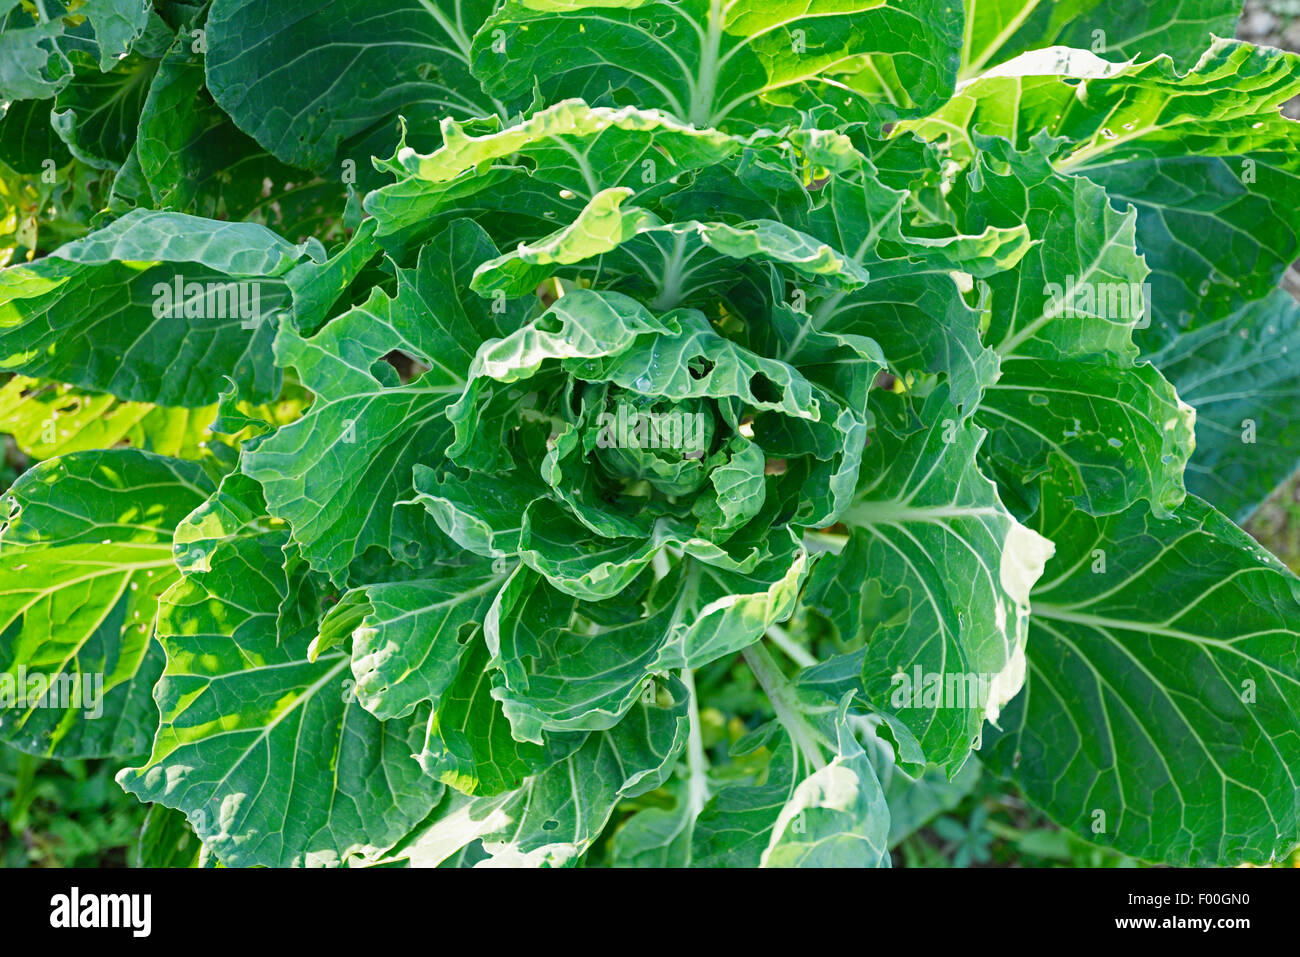 Brussel sprouts (Brassica oleraceae var. gemmifera), plant from top view, Austria, Styria Stock Photo